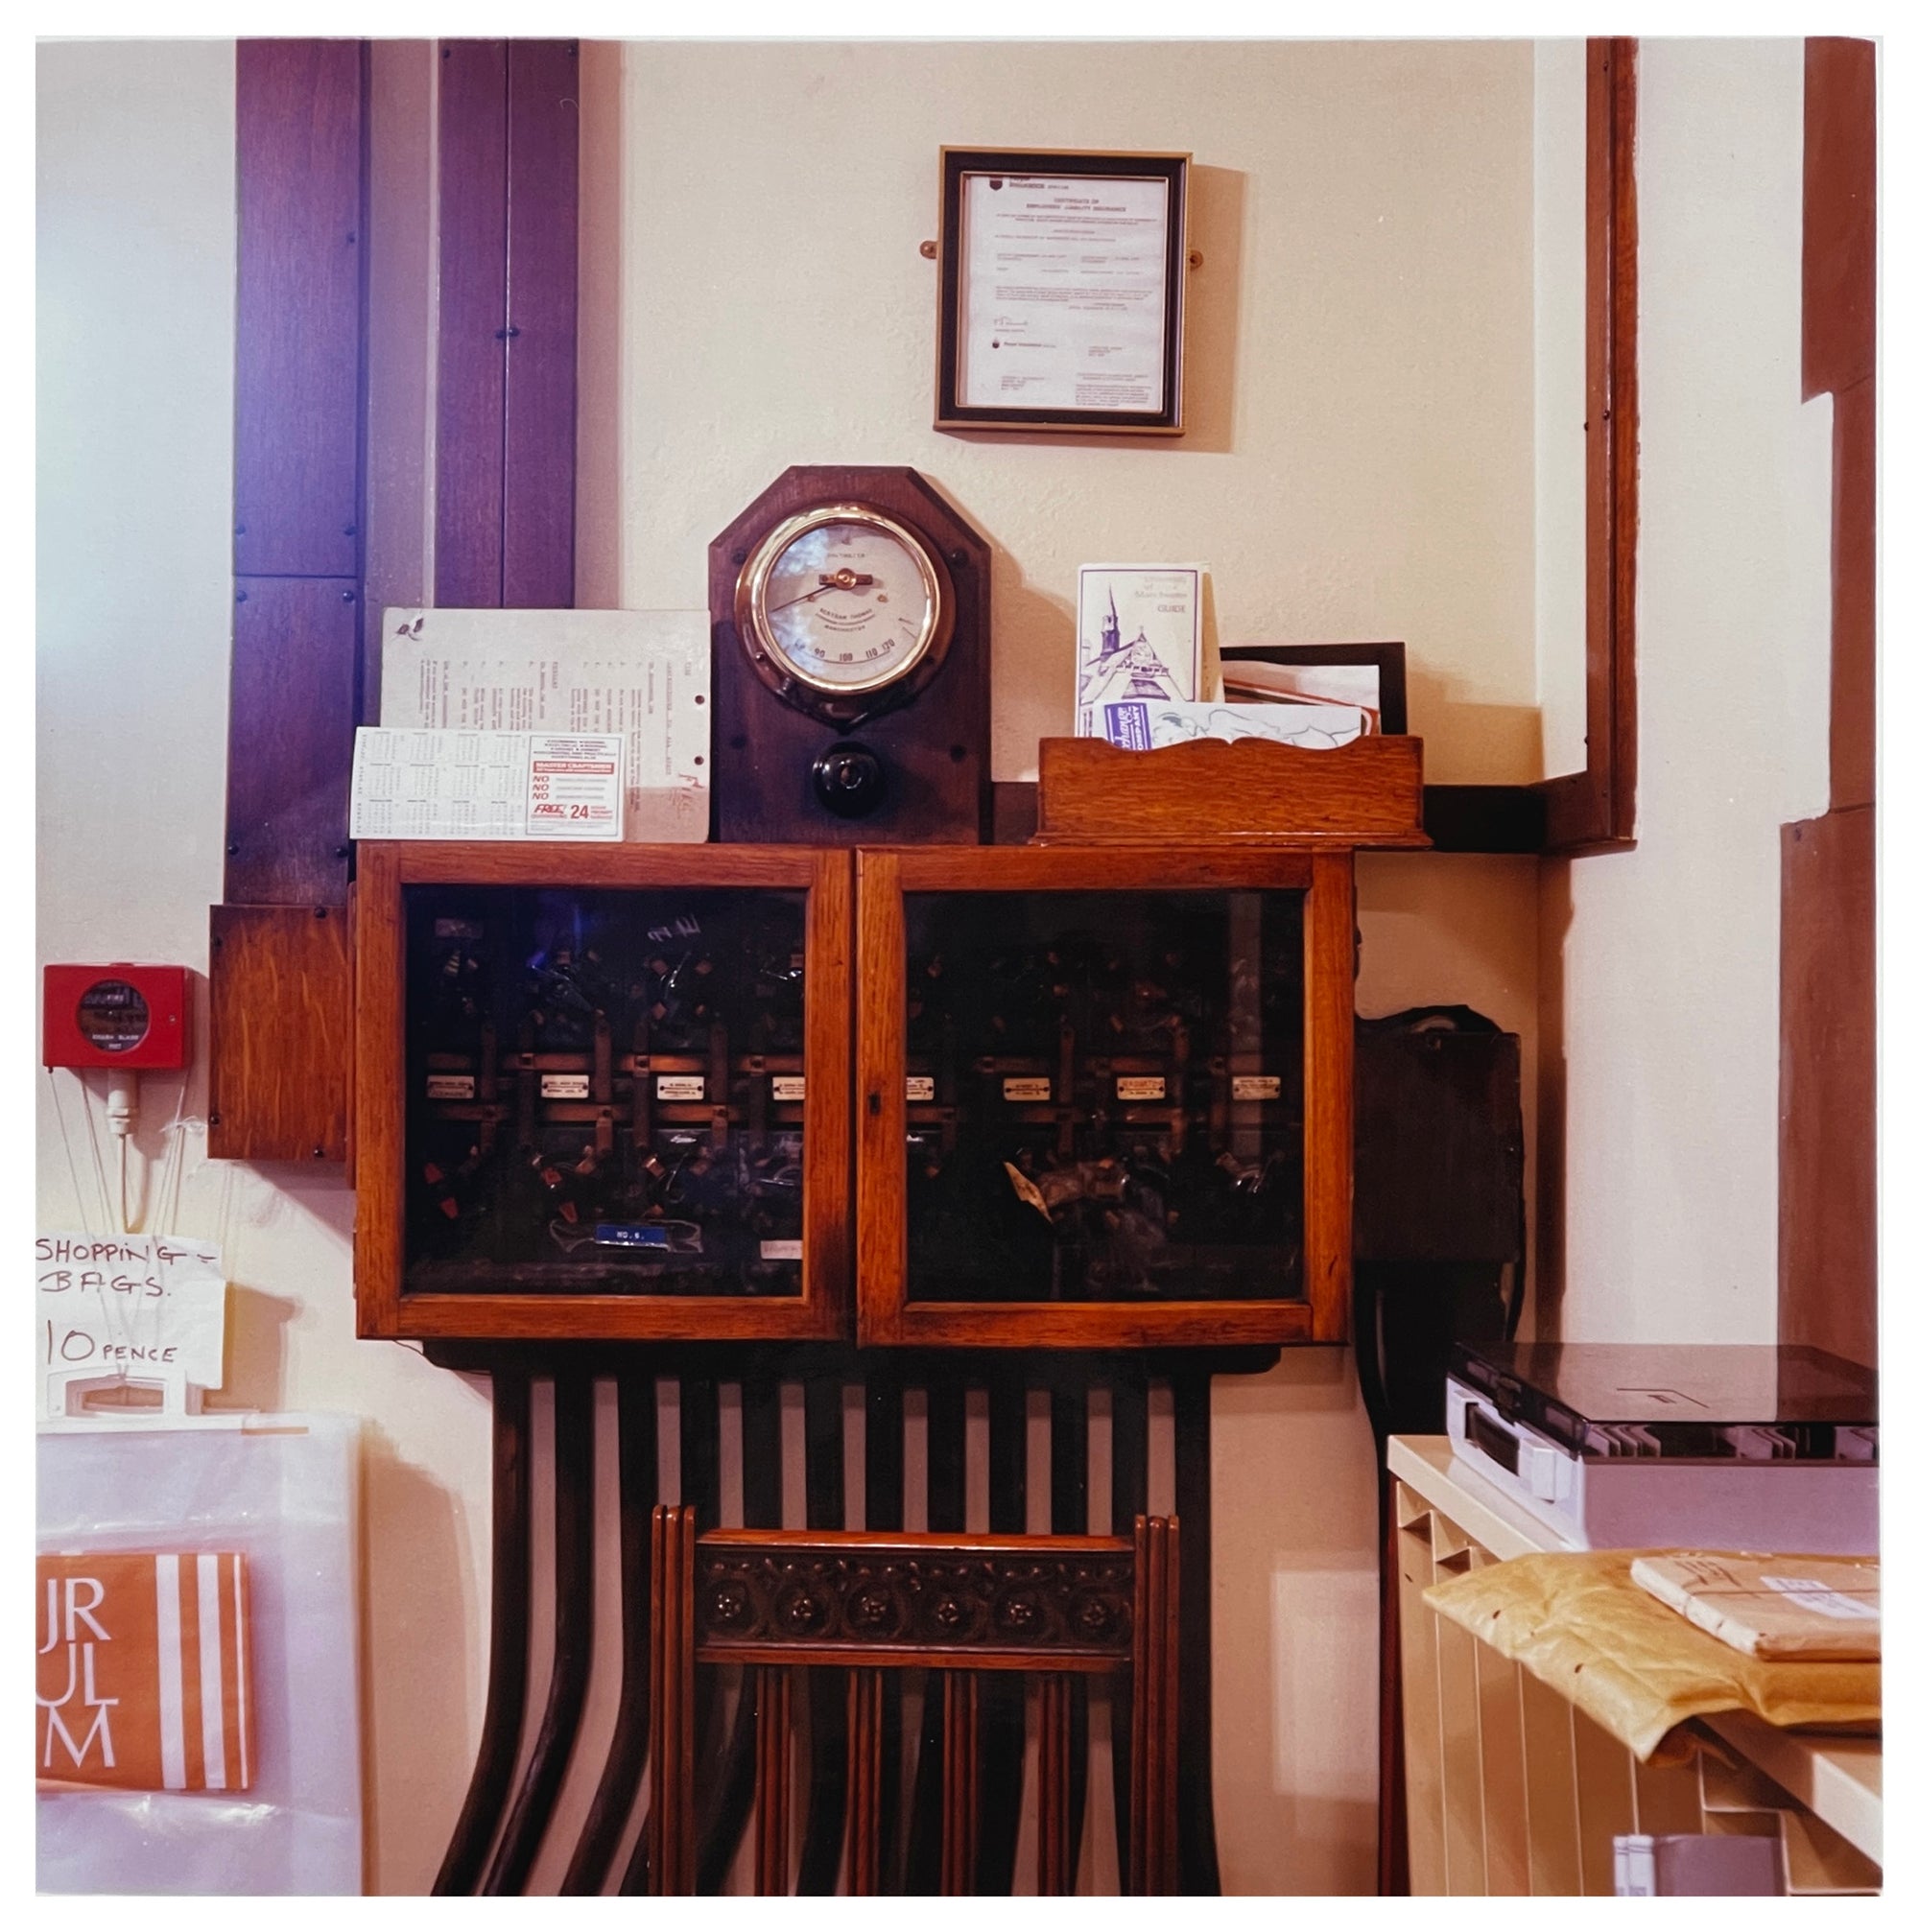 Vintage photograph by Richard Heeps.  Antique telephone exchange with meter on top in working library.  